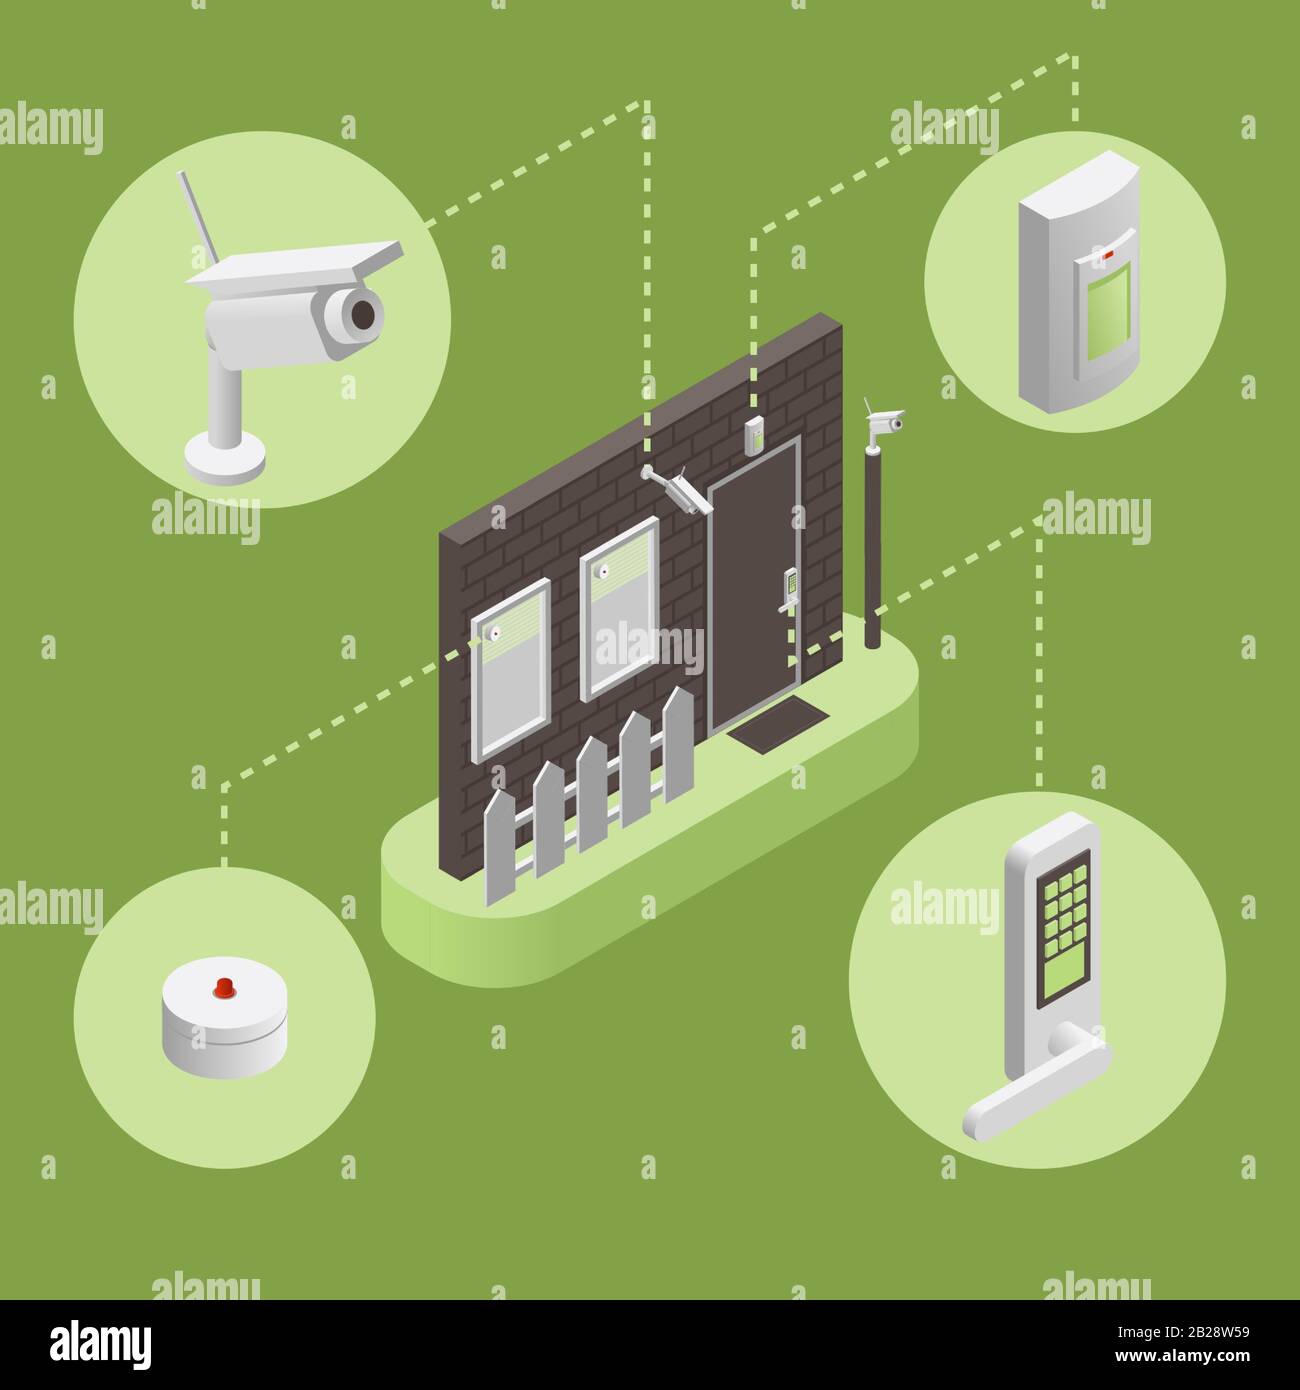 Smart house, intelligent security system infographic vector illustration. Wall, door and windows with surveillance cameras, alarm siren and signal system in isometric style. Security system concept. Stock Vector